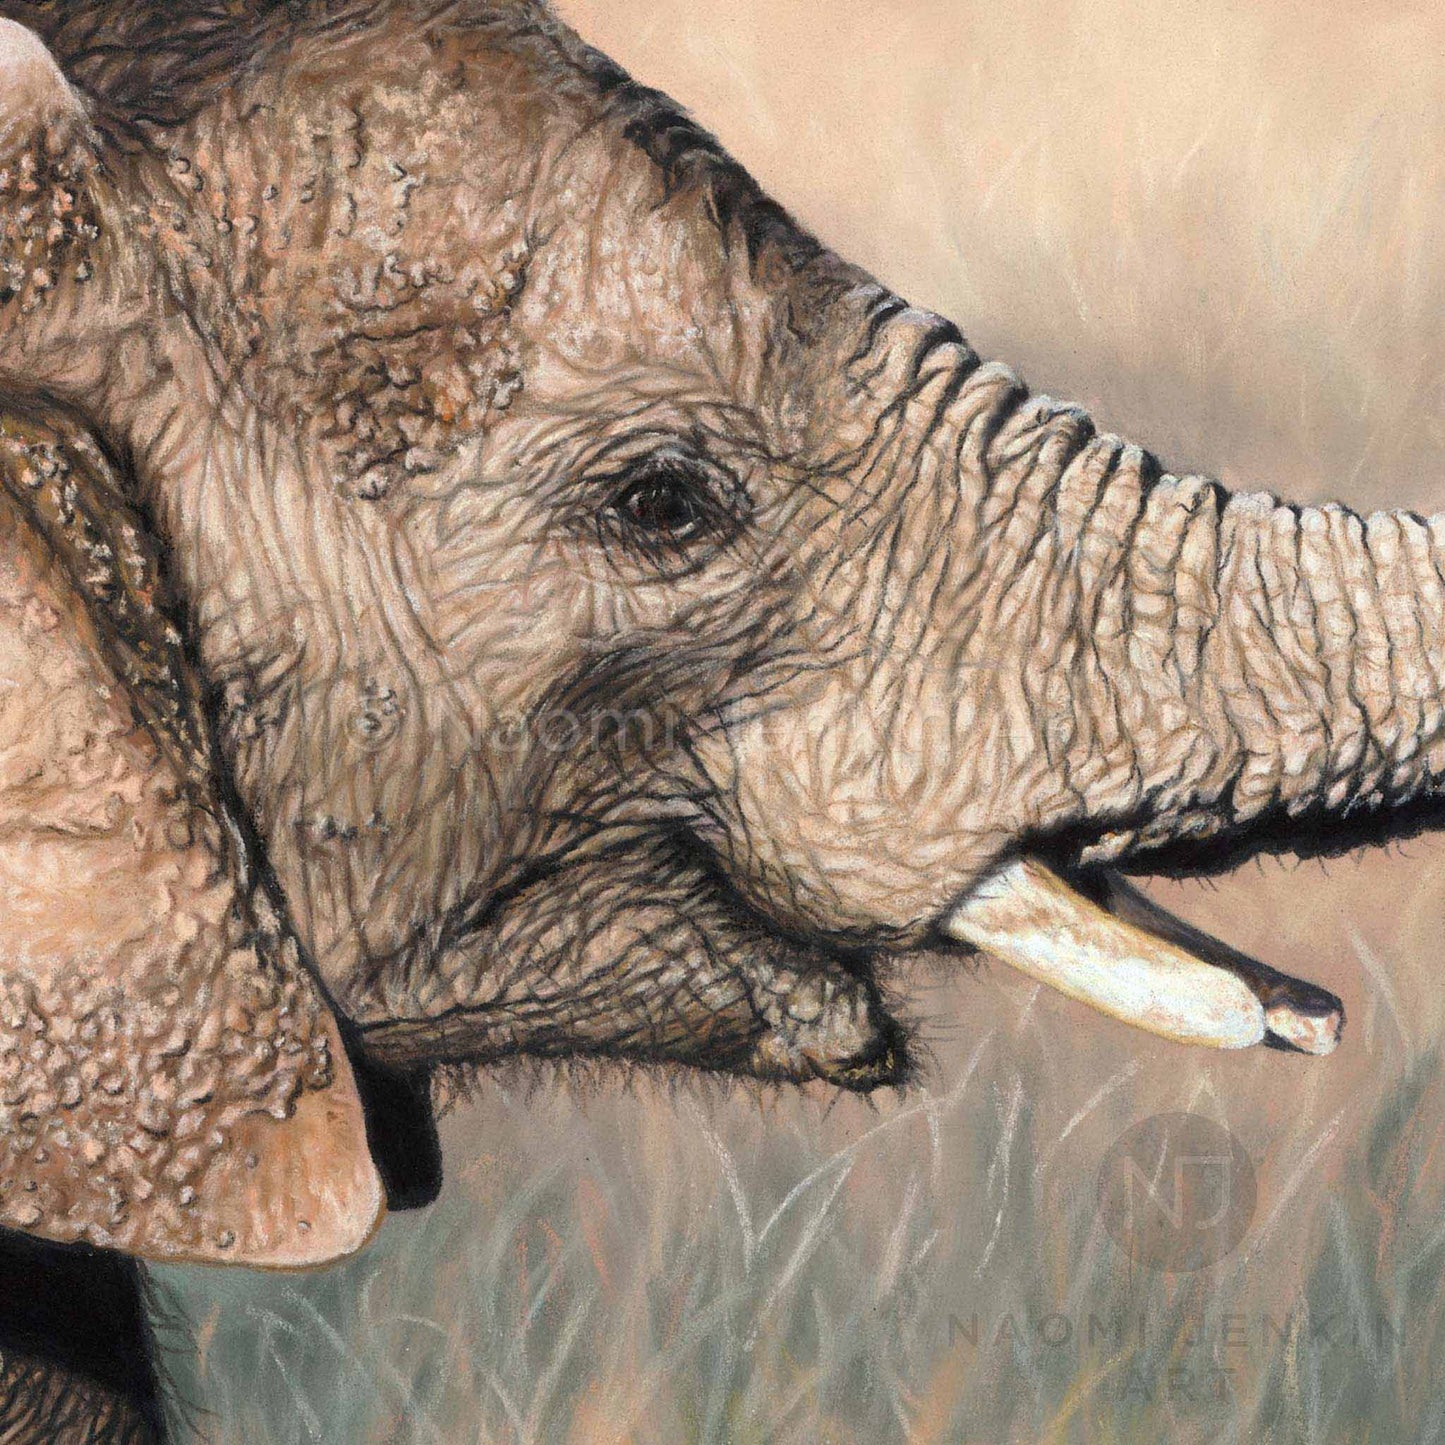 Elephant calf drawing close up,  from the elephant print 'Little and Large' by Naomi Jenkin